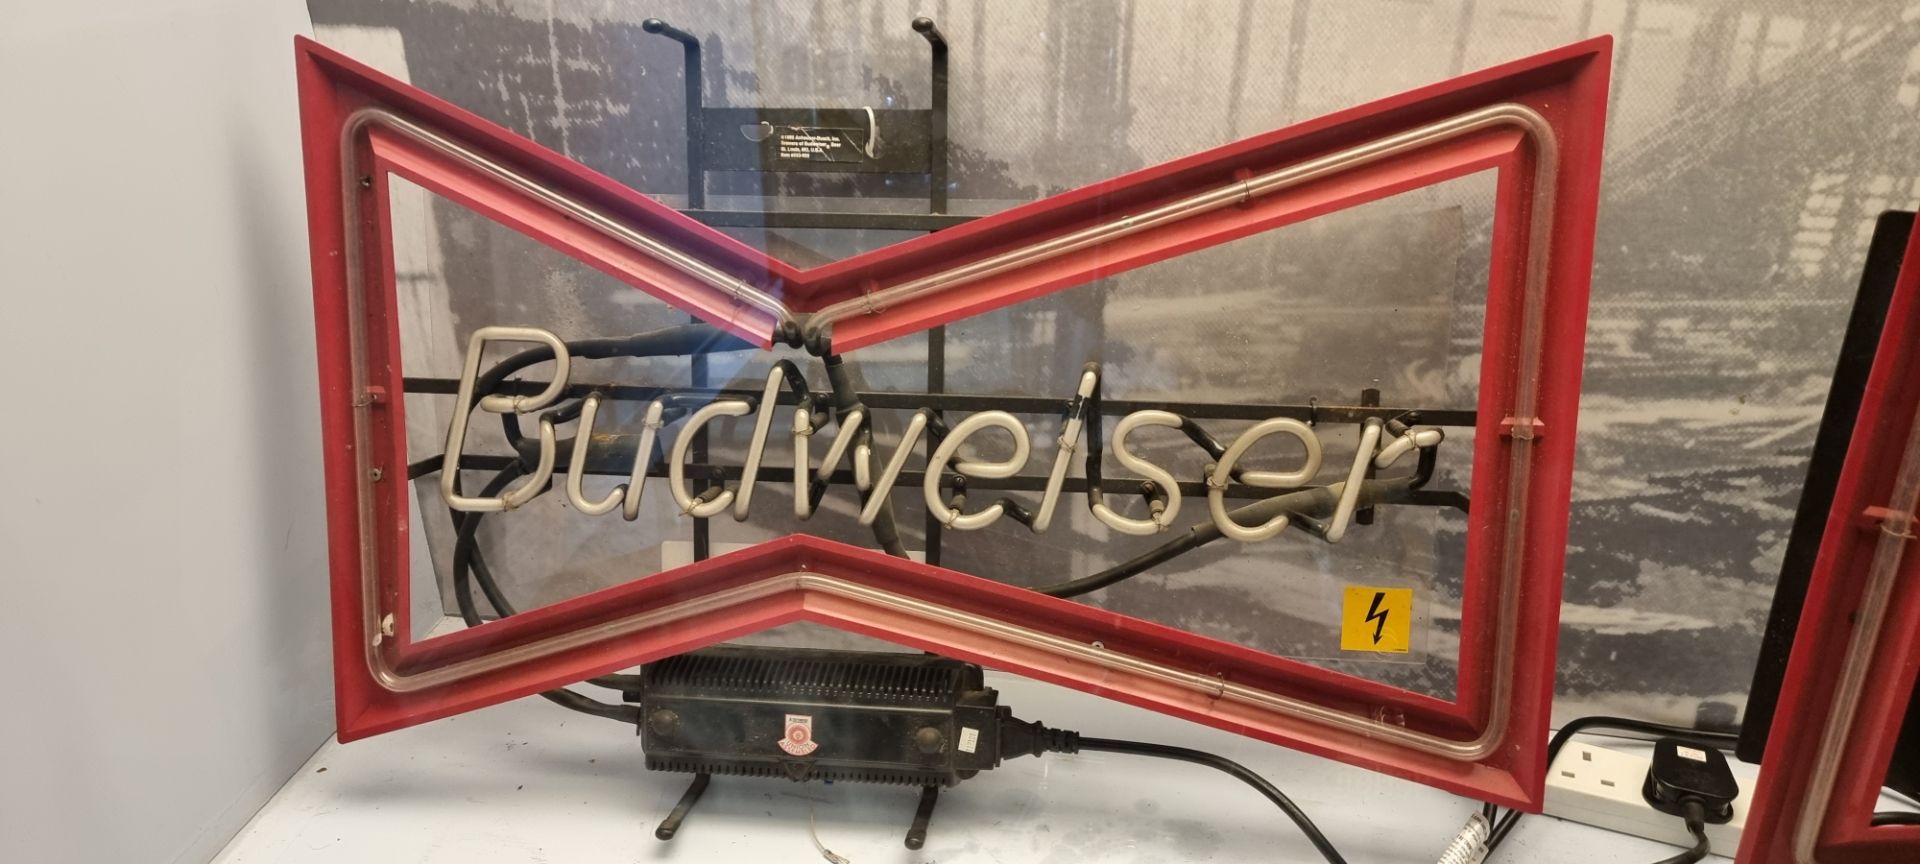 A neon sign, Budweiser, c.1990s, mounted power supply and wall brackets, 72cm x 42cm - Image 2 of 2